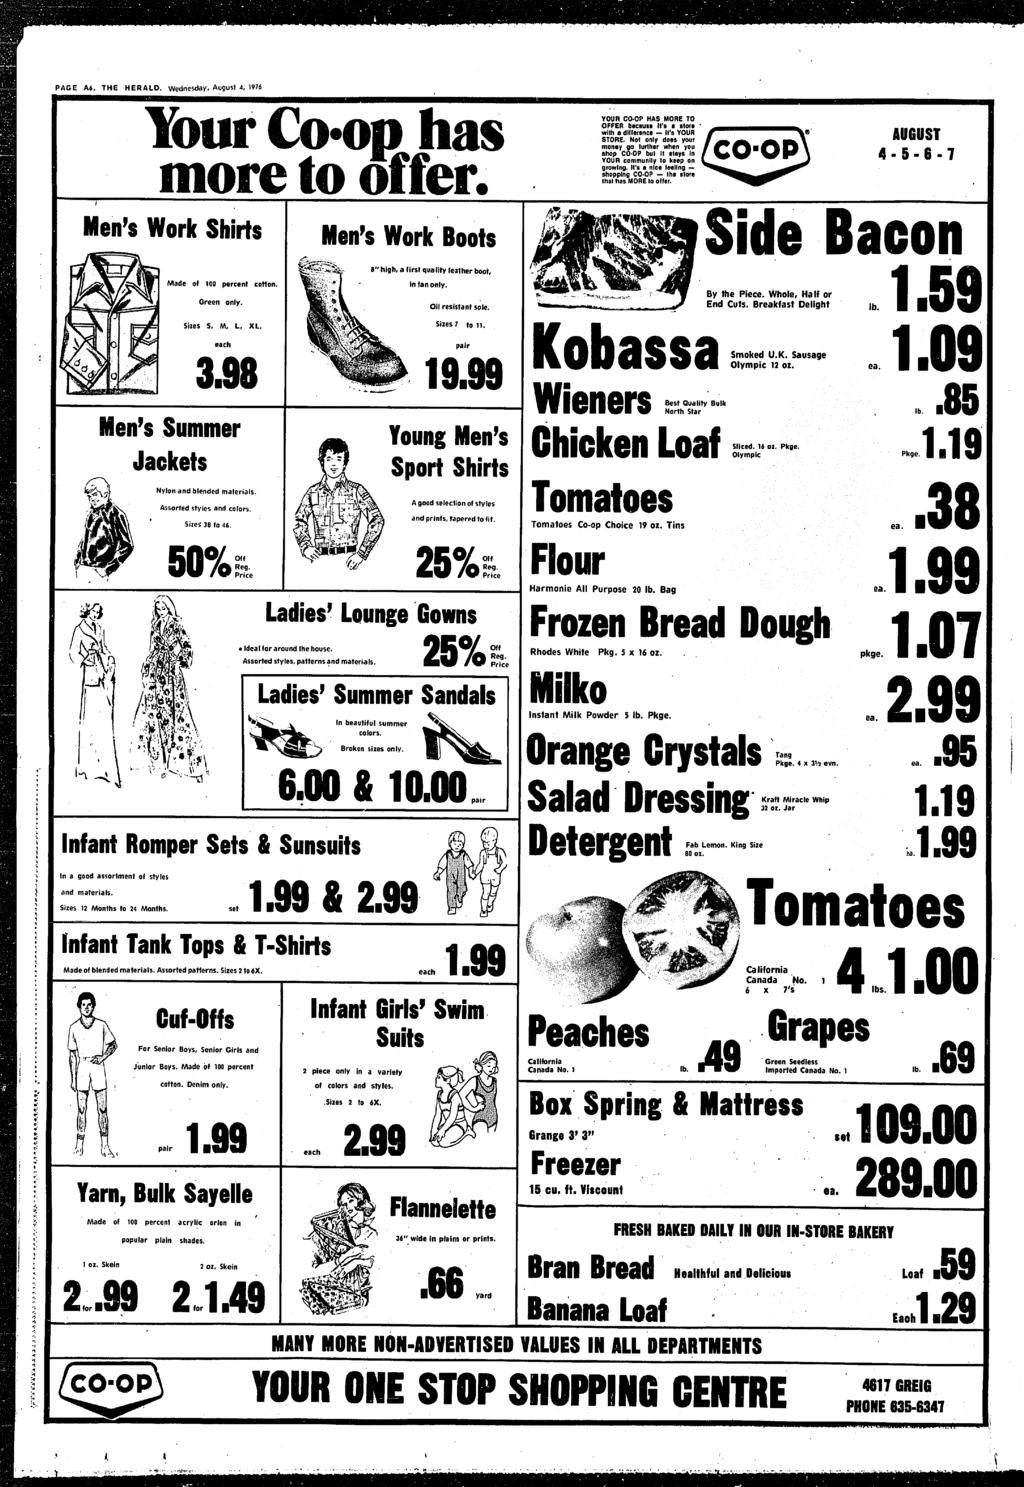 PAGE AB, THE HERALO Wednesday, August 4, 1976 opohas ' o(nr, more 1 :o Oler. Men's Work Shrts Men's WorkBoots. YOUR CO.OP HAS MORE TO OFFER because n'e e store ~.' wth S dfference -- t's YOUR STORE.